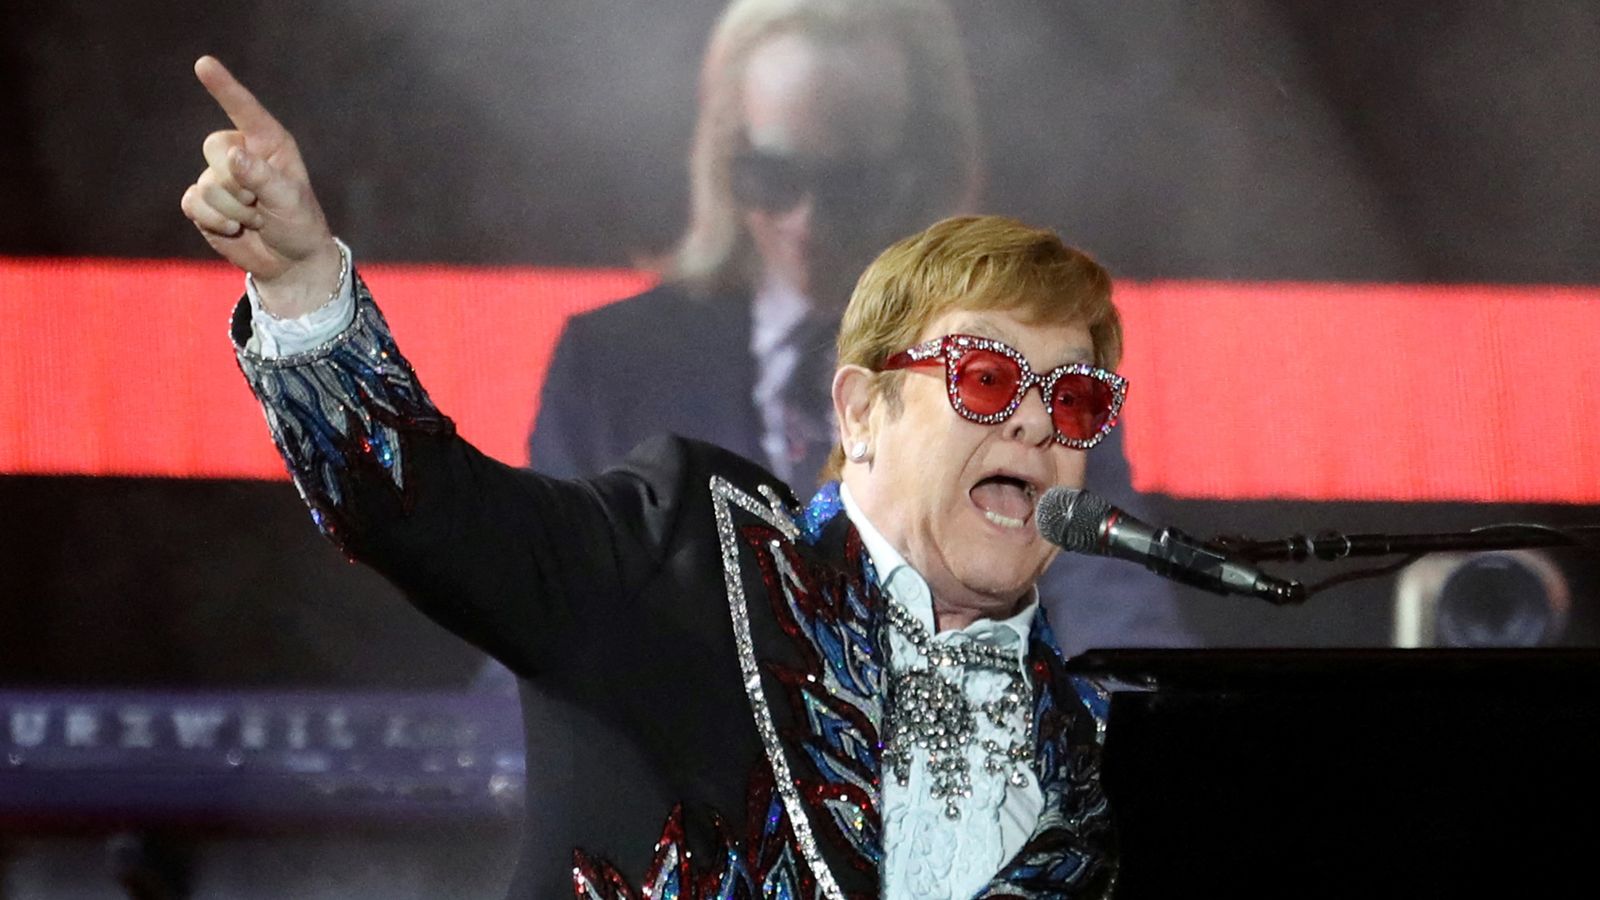 Sir Elton John to headline Glastonbury in last UK gig of farewell tour after 52 years on the road